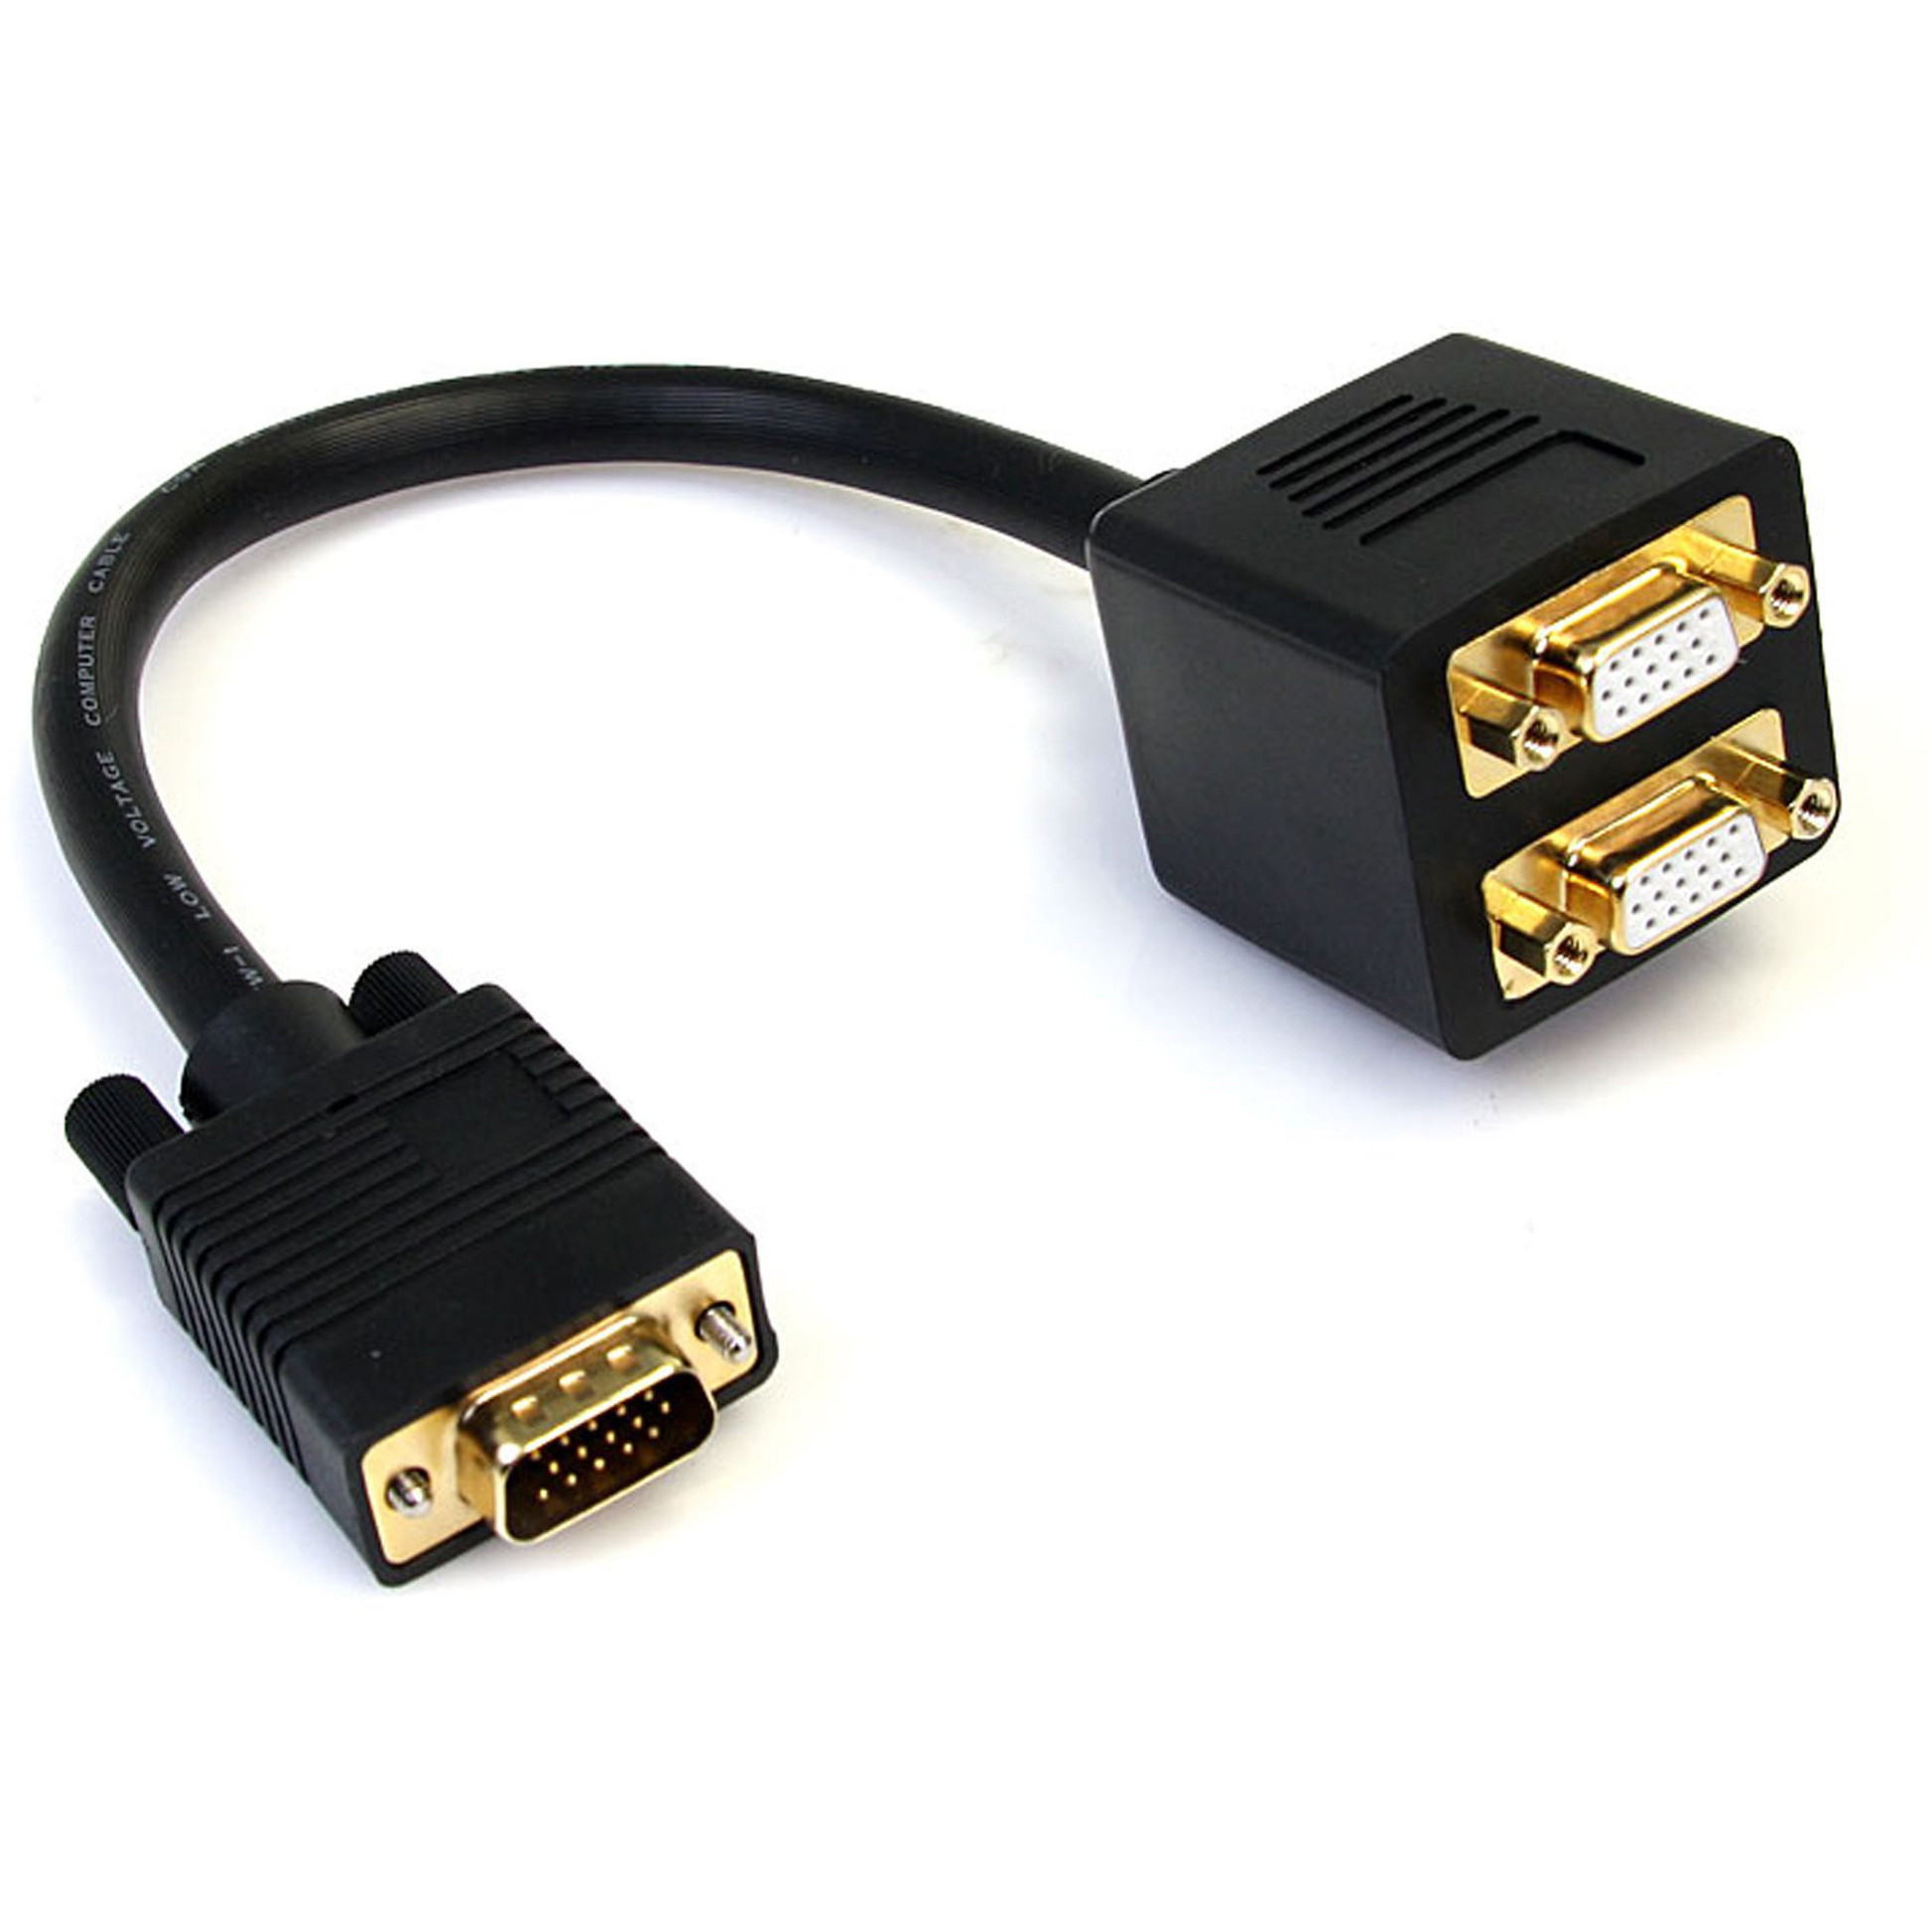 Startech .com 1 ft VGA to 2x VGA Video Splitter CableM/FMirror the output from a VGA source to two VGA displays.vga splitter cablev… VGASPL1VV